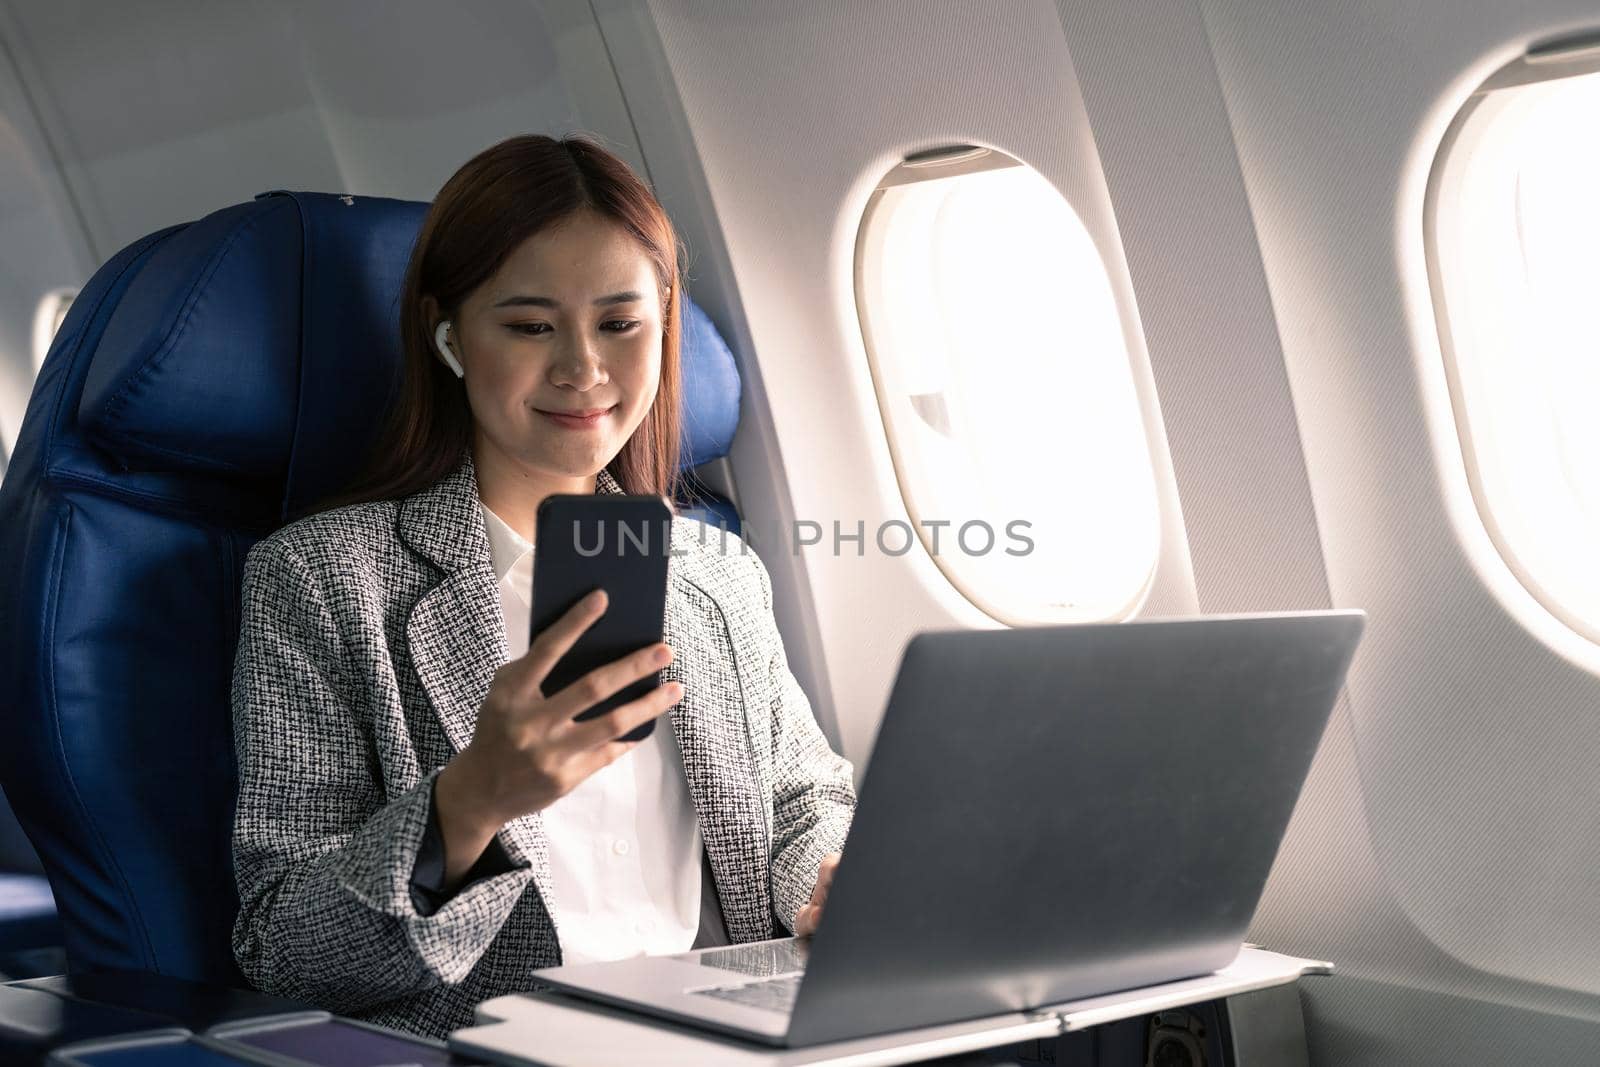 Happy and cheerful asian businesswoman using smartphone and laptop computer during flight. Urban lifestyle by nateemee